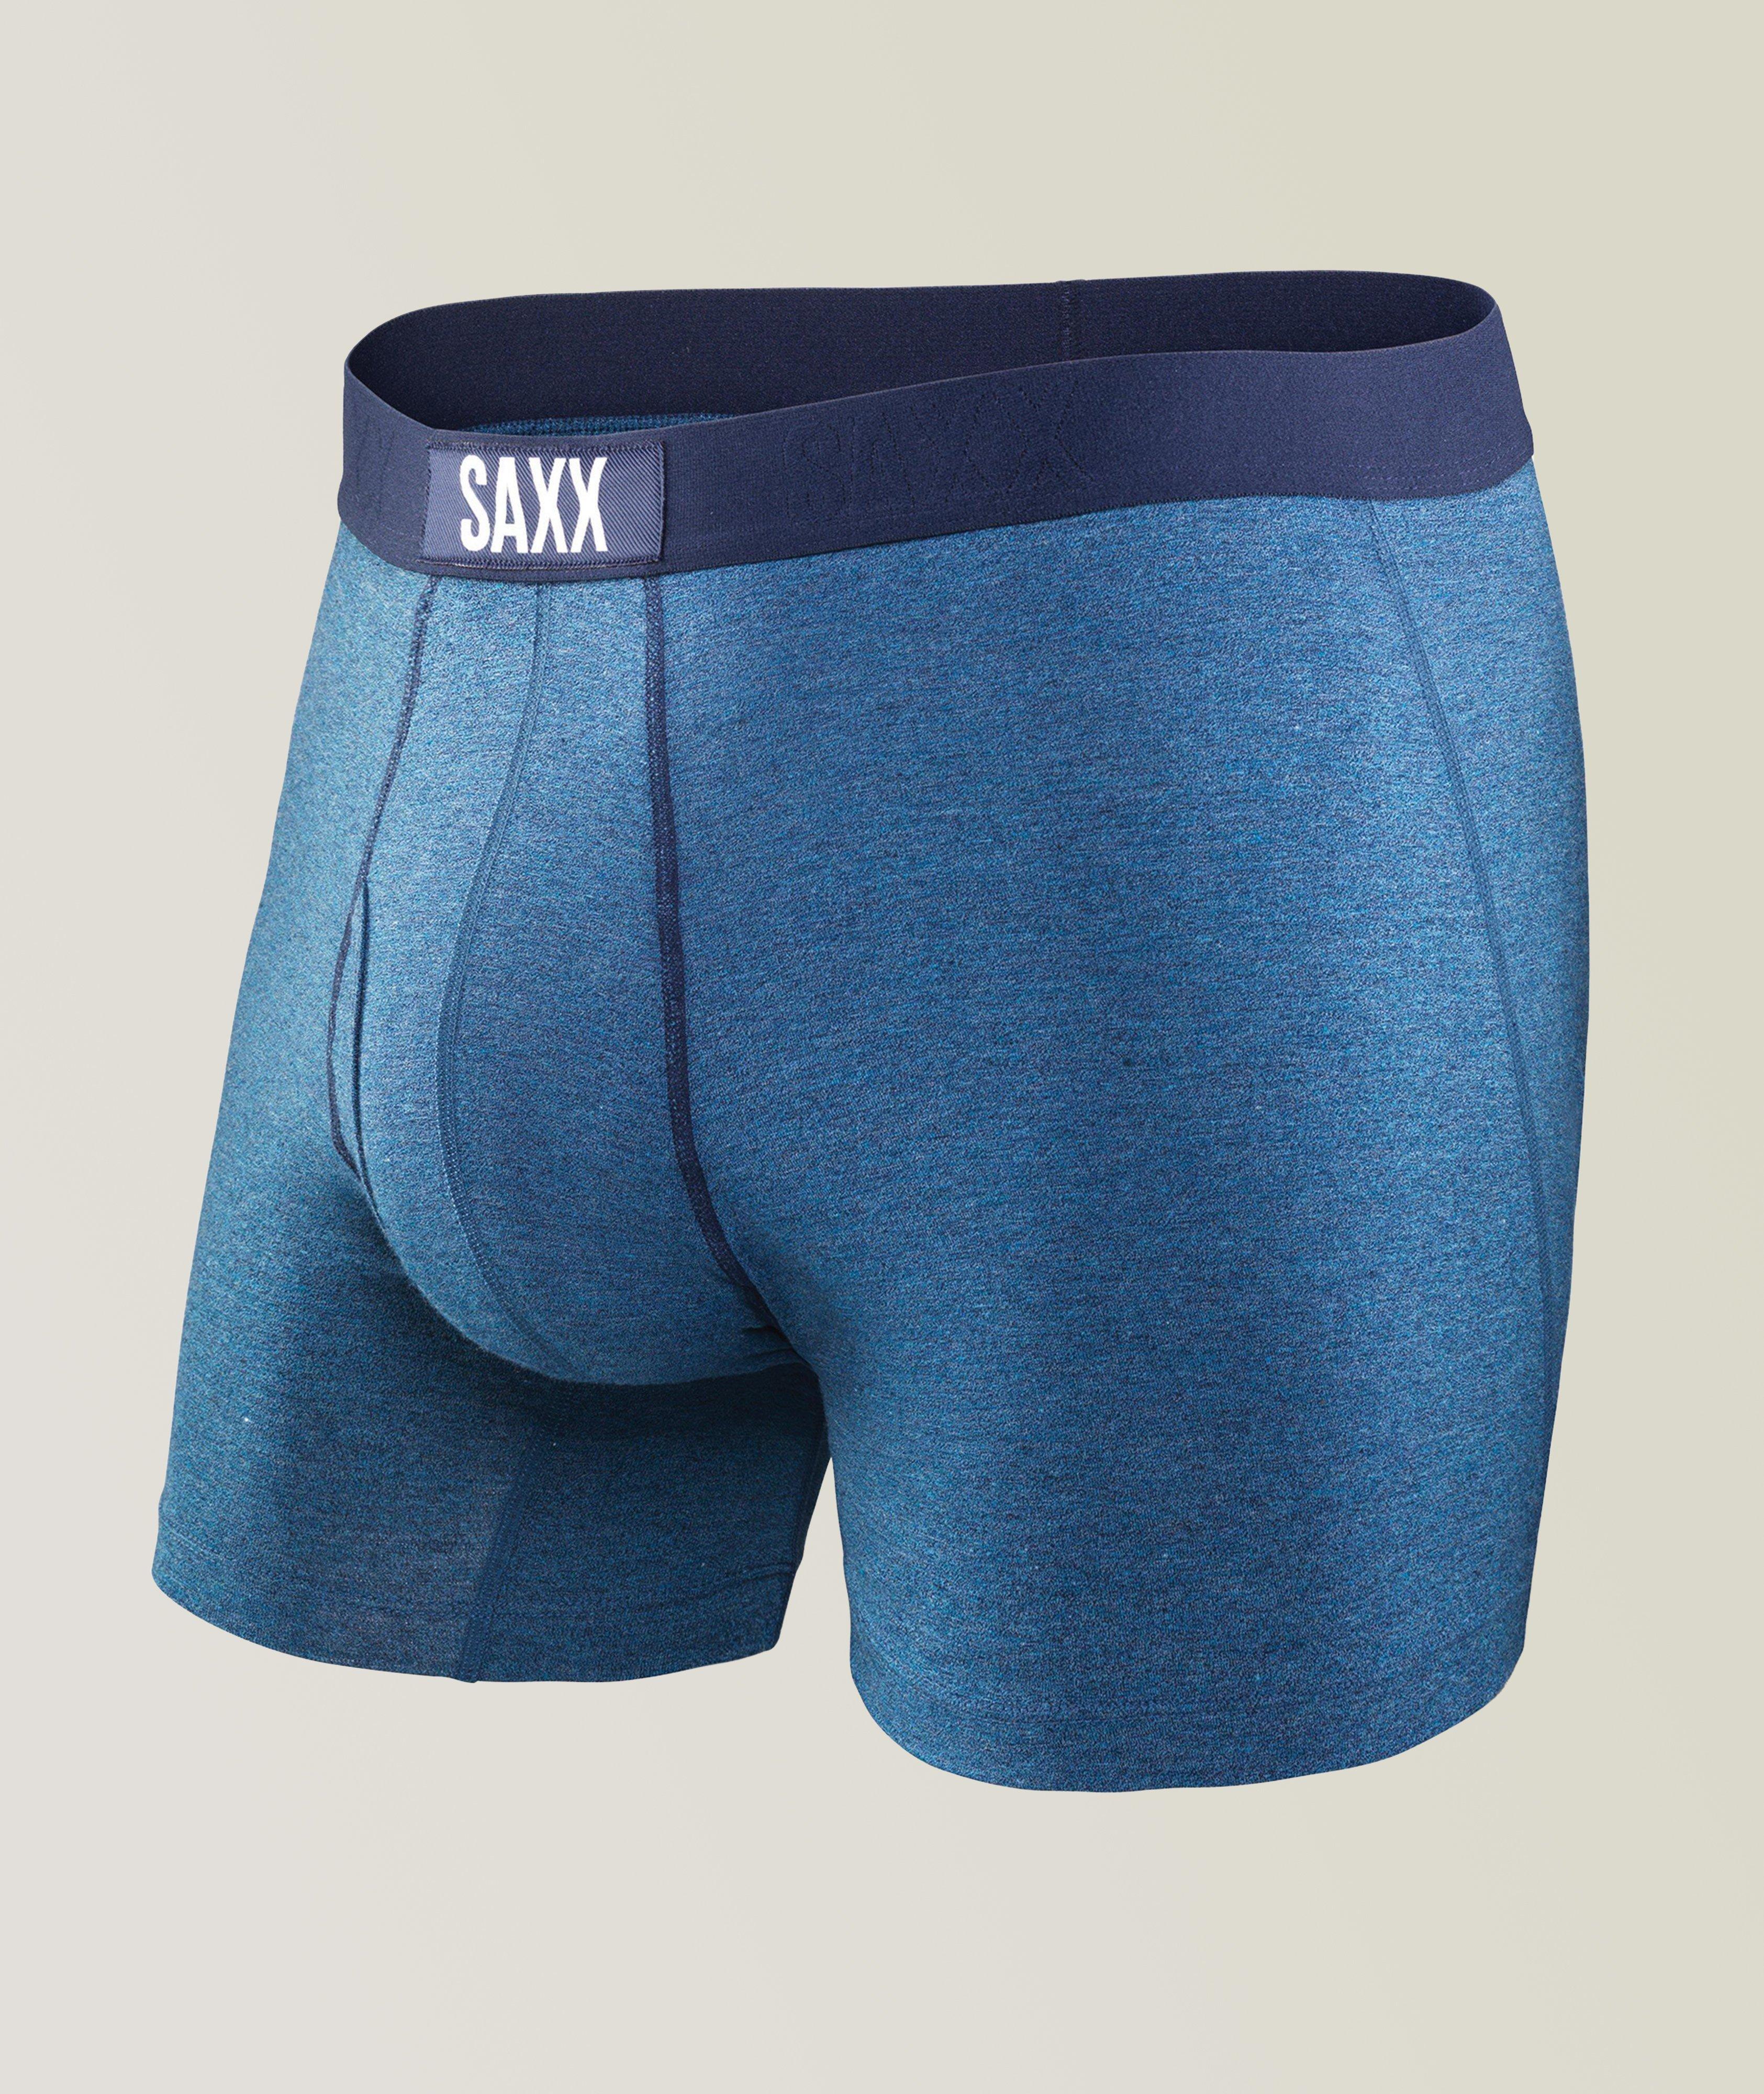 Marled Boxer Briefs image 0